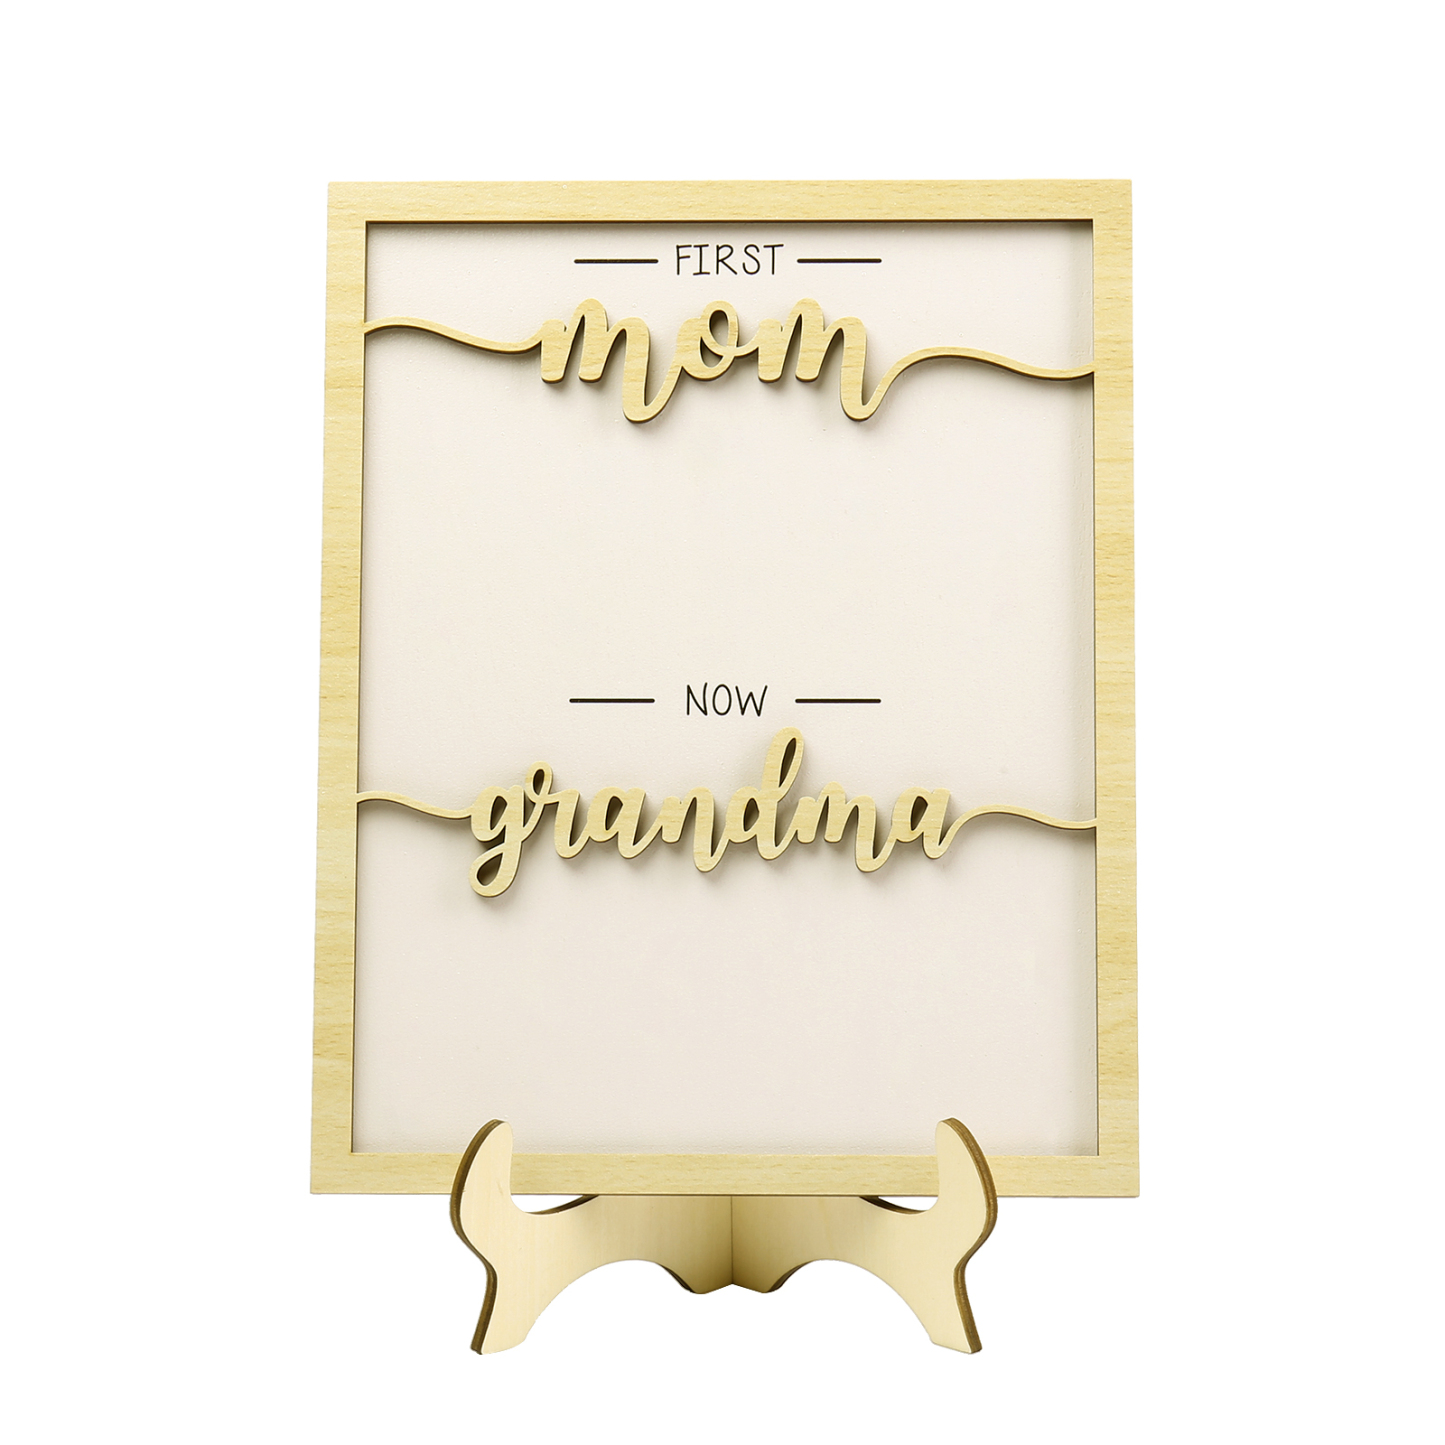 11 Names - Personalized Customized Birth Flower Home Frame Wooden Decoration for Mom/Grandma